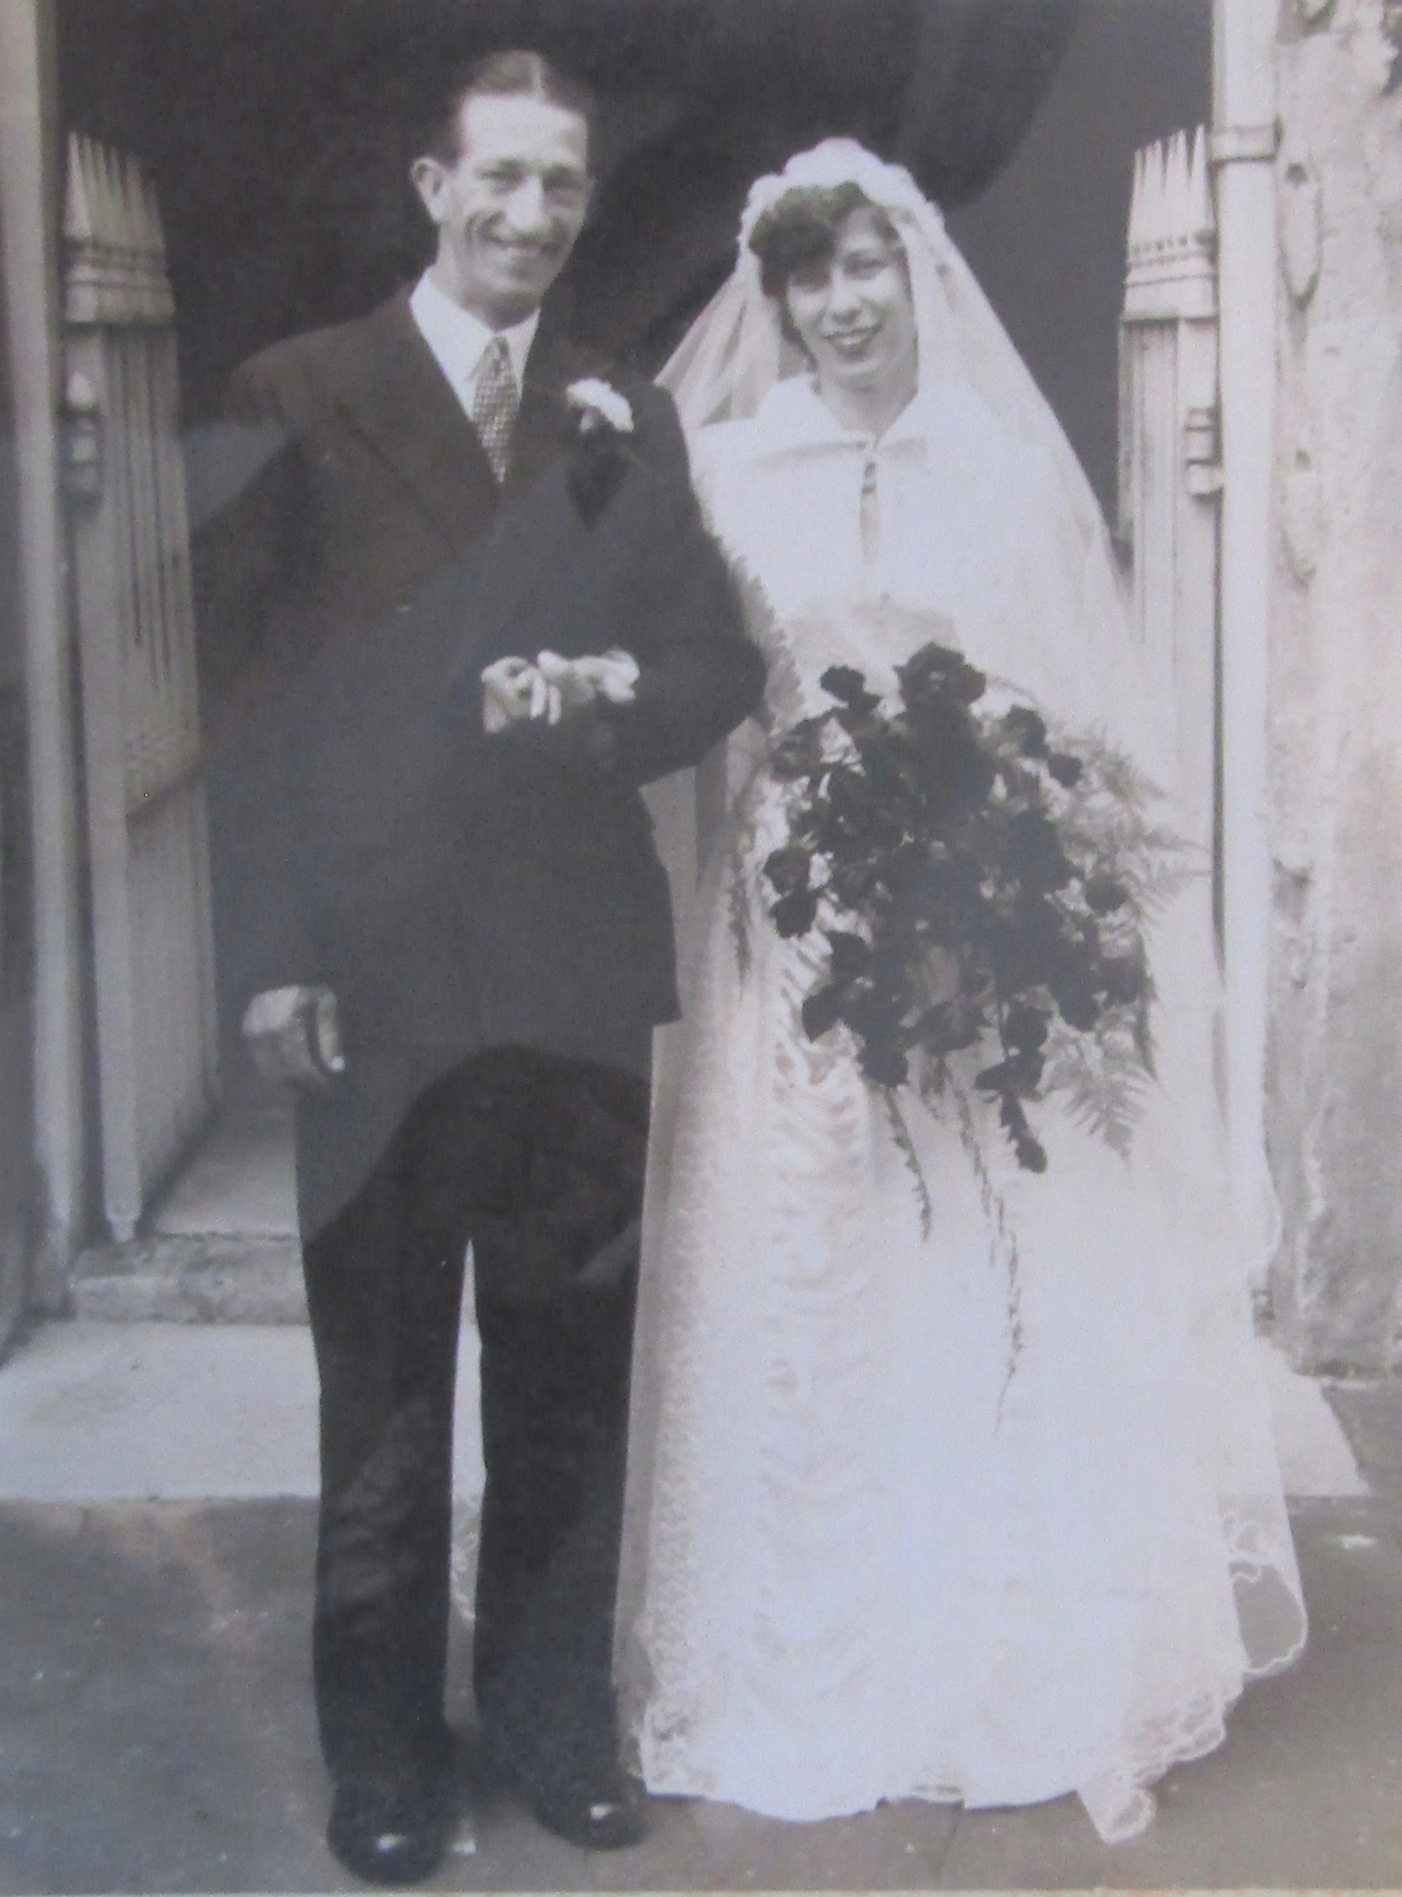 Ivor and Pansy Warren on their wedding day